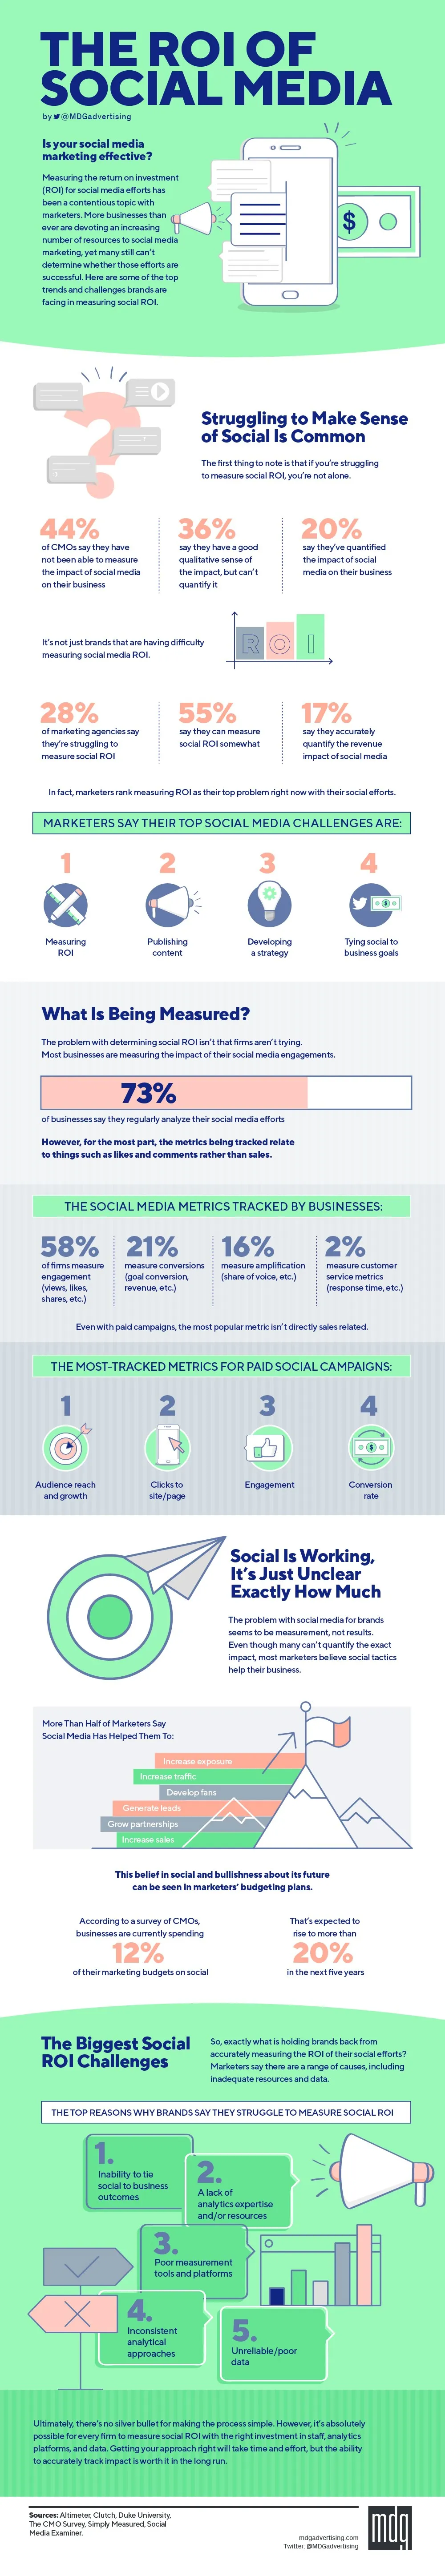 The ROI of Social Media [Infographic]